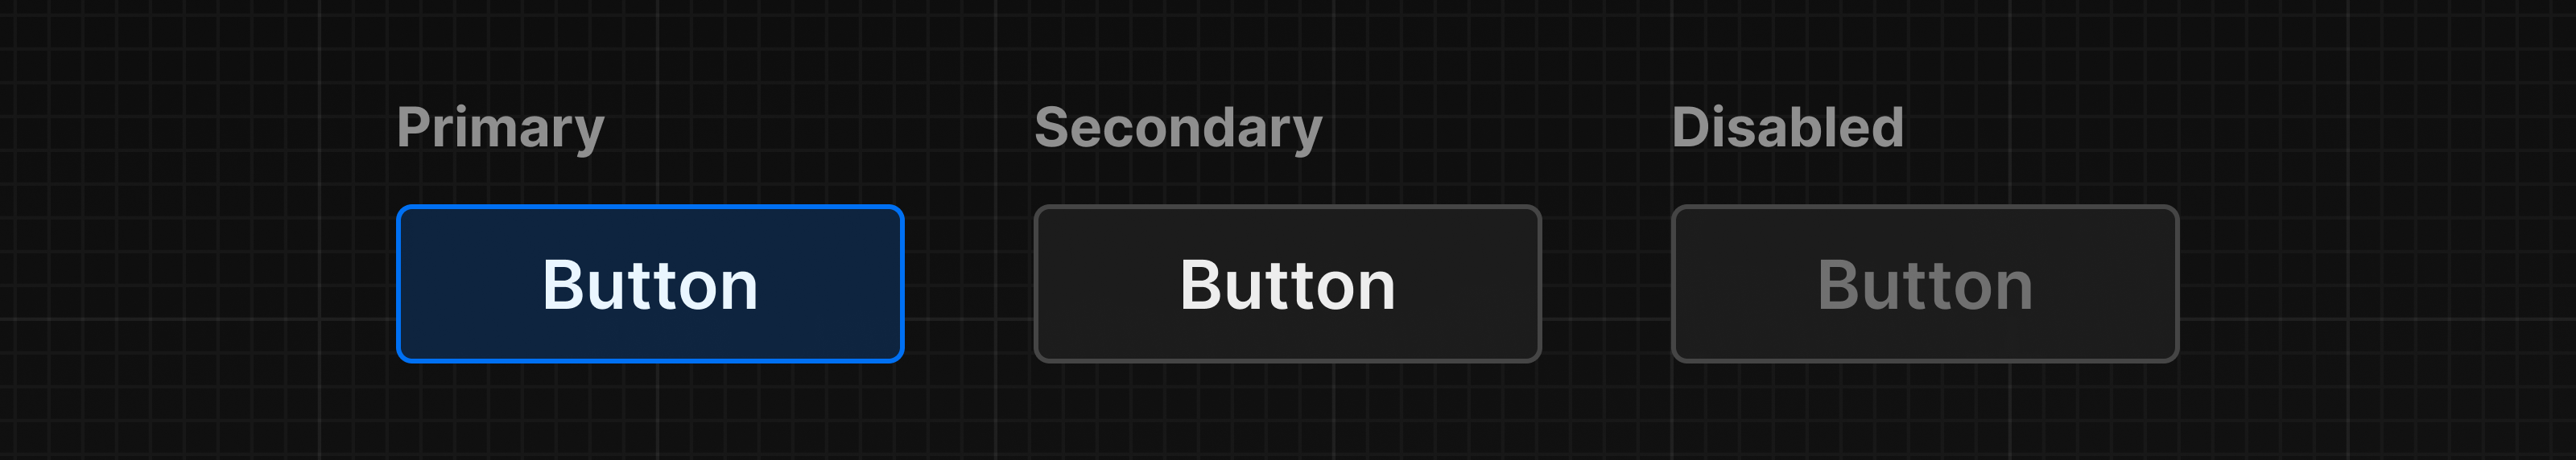 Diagram showing 3 variations of a button component: Primary, Secondary, and Disabled